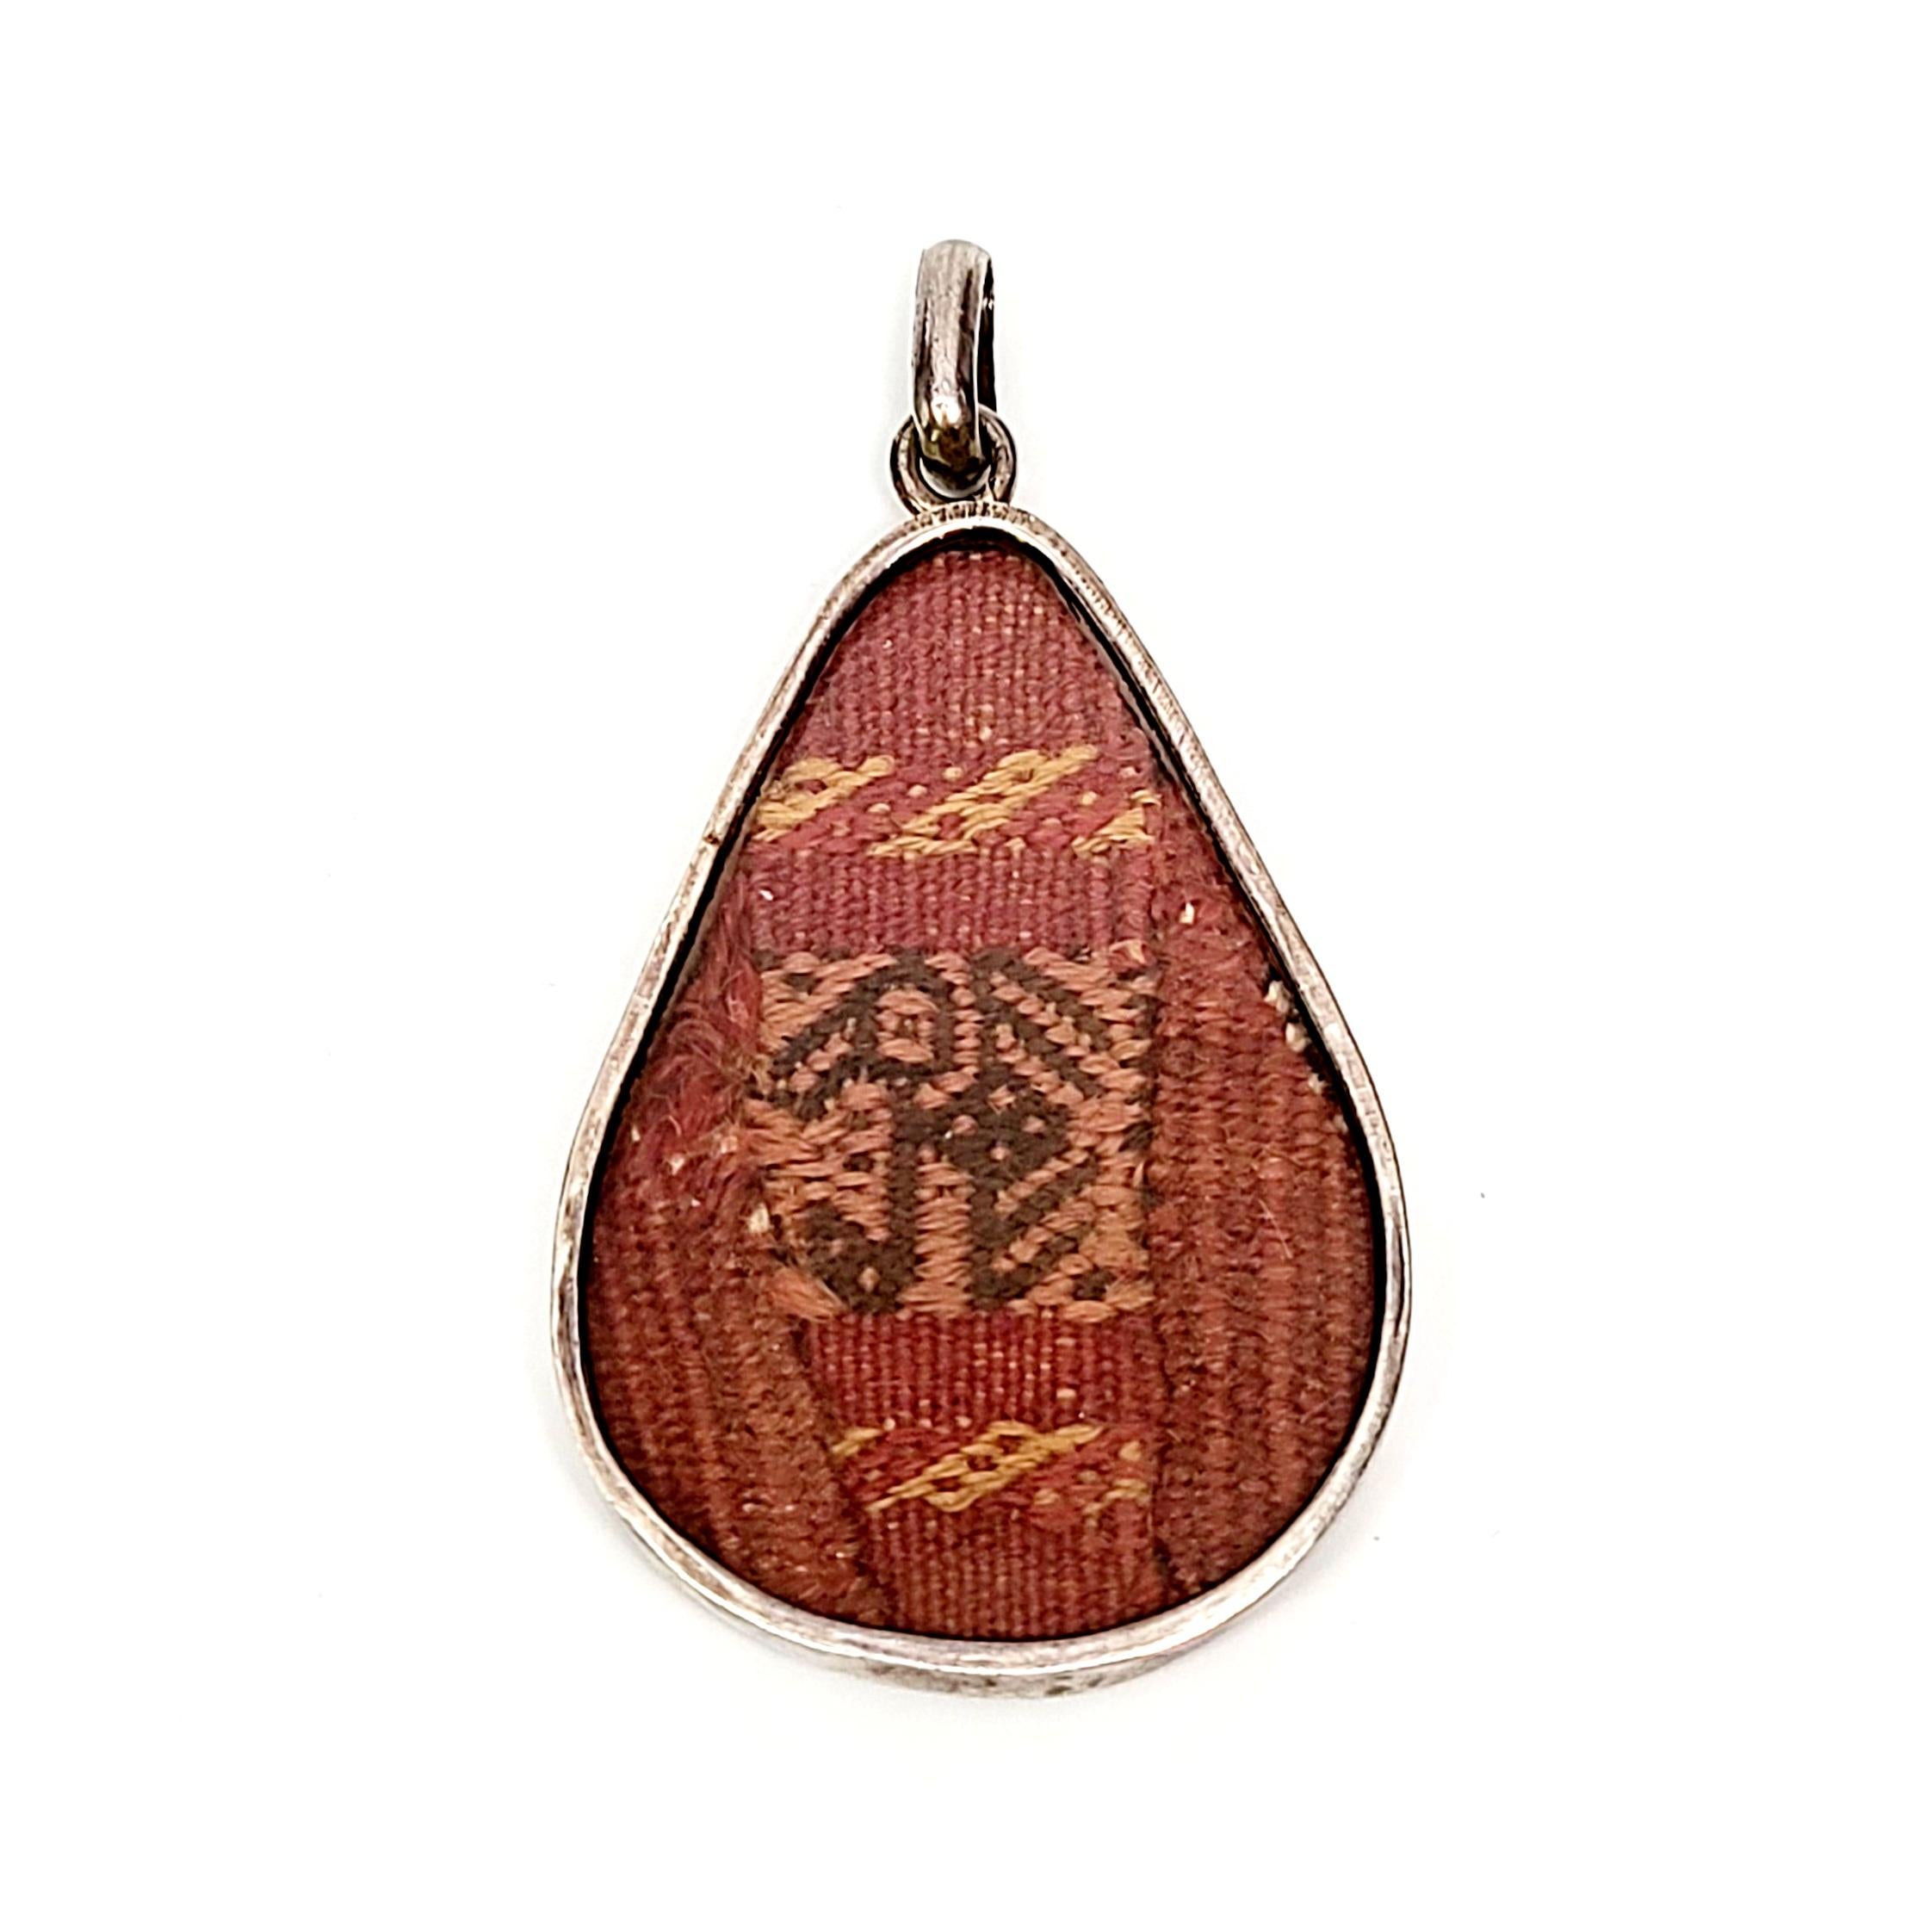 Vintage sterling silver and woven textile pendant.

A beautifully woven Tribal textile is encased in a sterling silver framed teardrop shaped pendant.

Measures approx 2 1/2